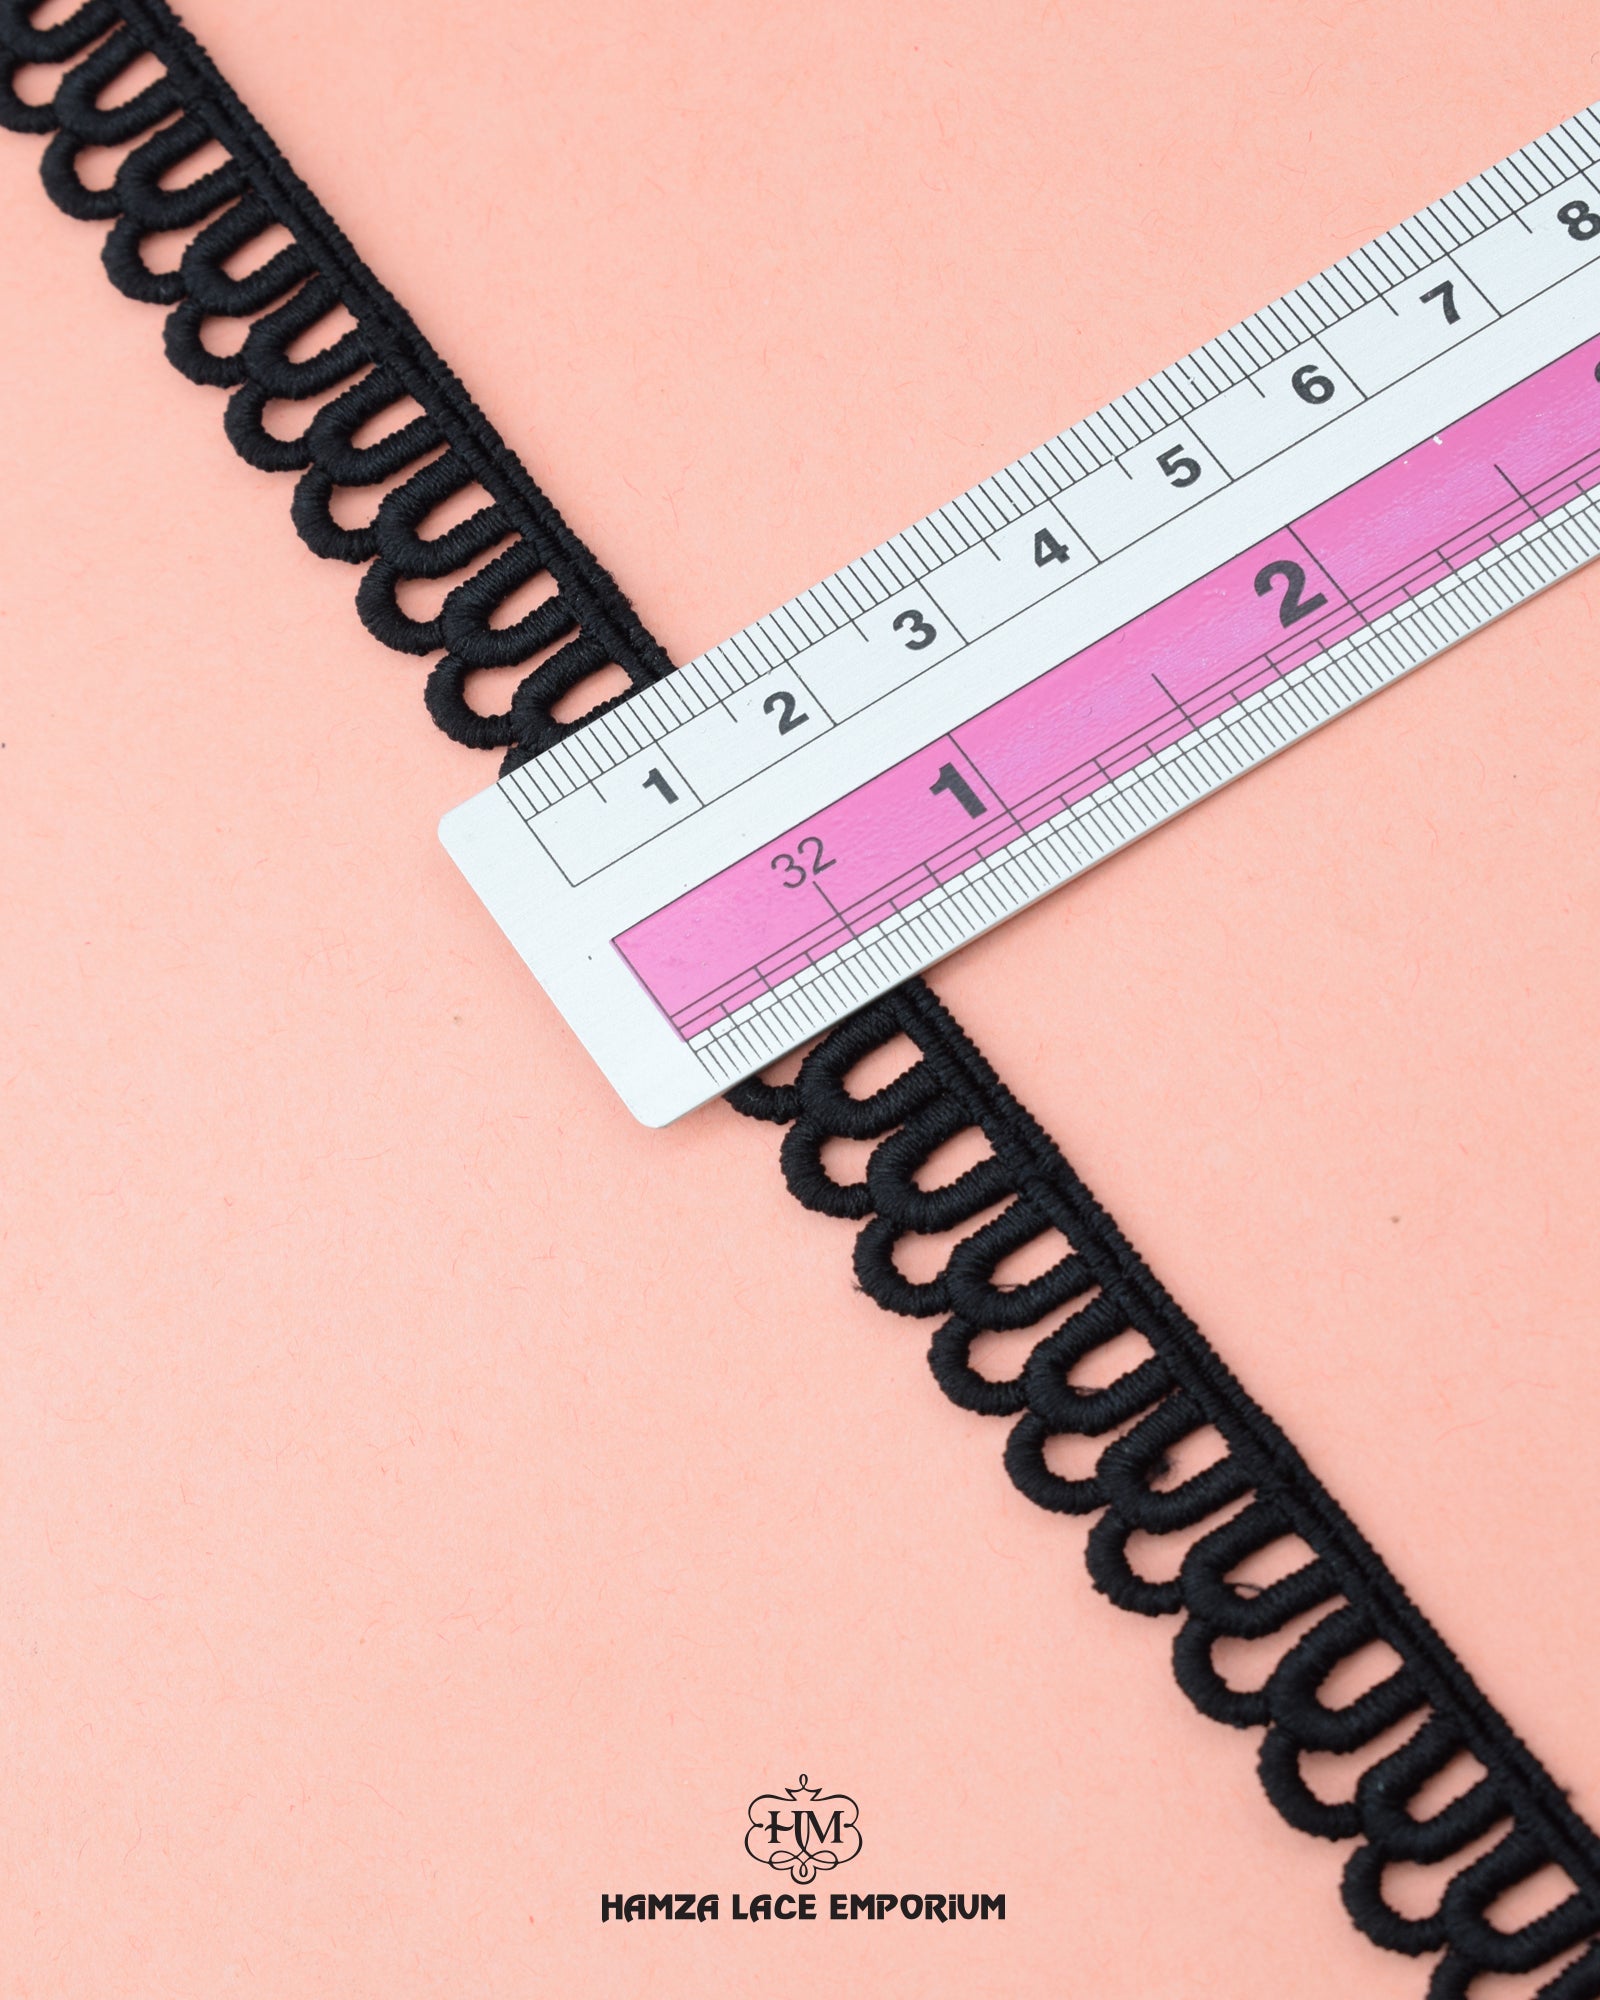 Size of the 'Edging Lace 23826' is given with the help of a ruler as '0.5' inches